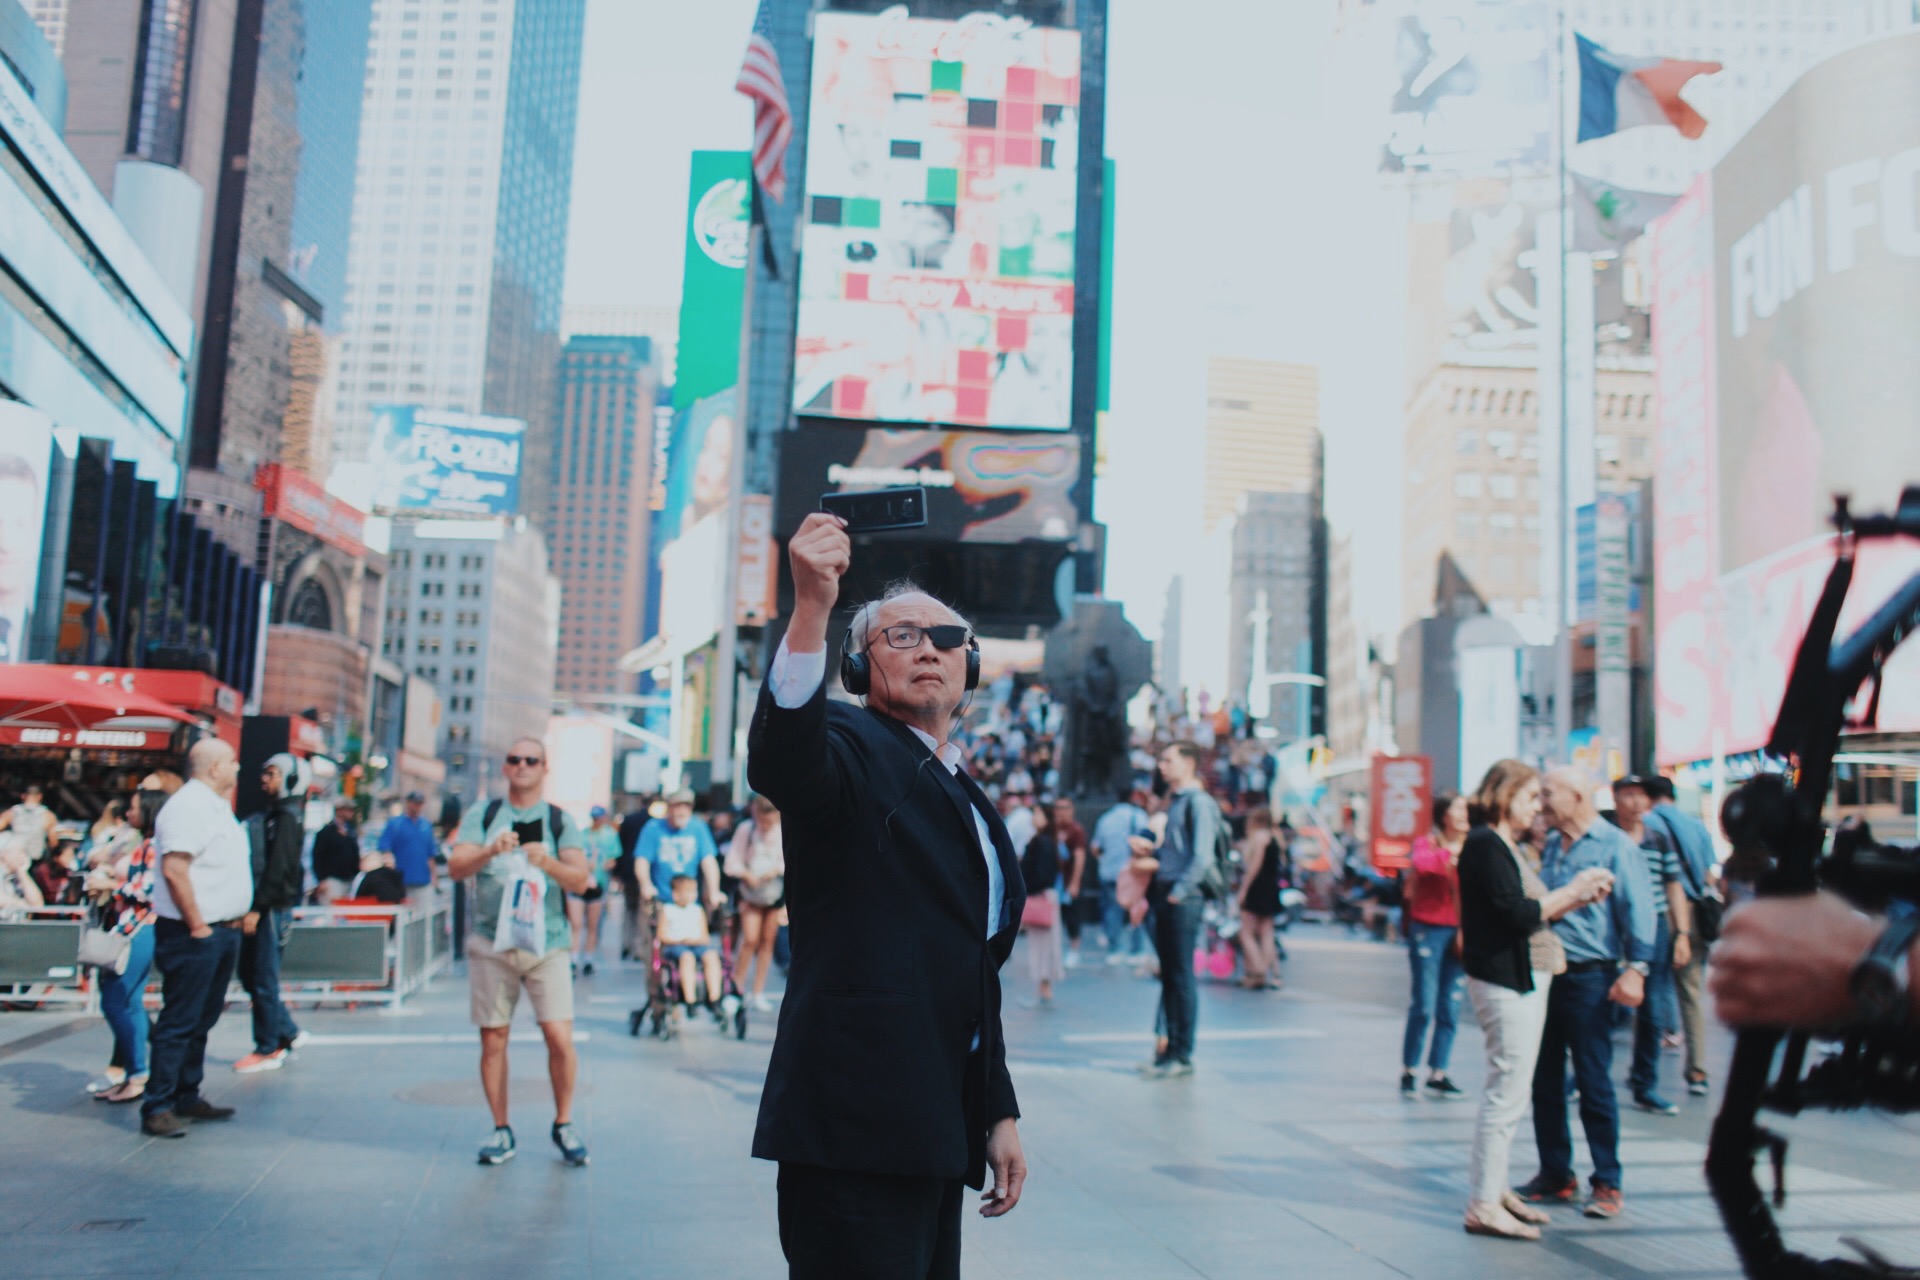 Artist Mel Chin holds a cellphone in front of him at Times Square